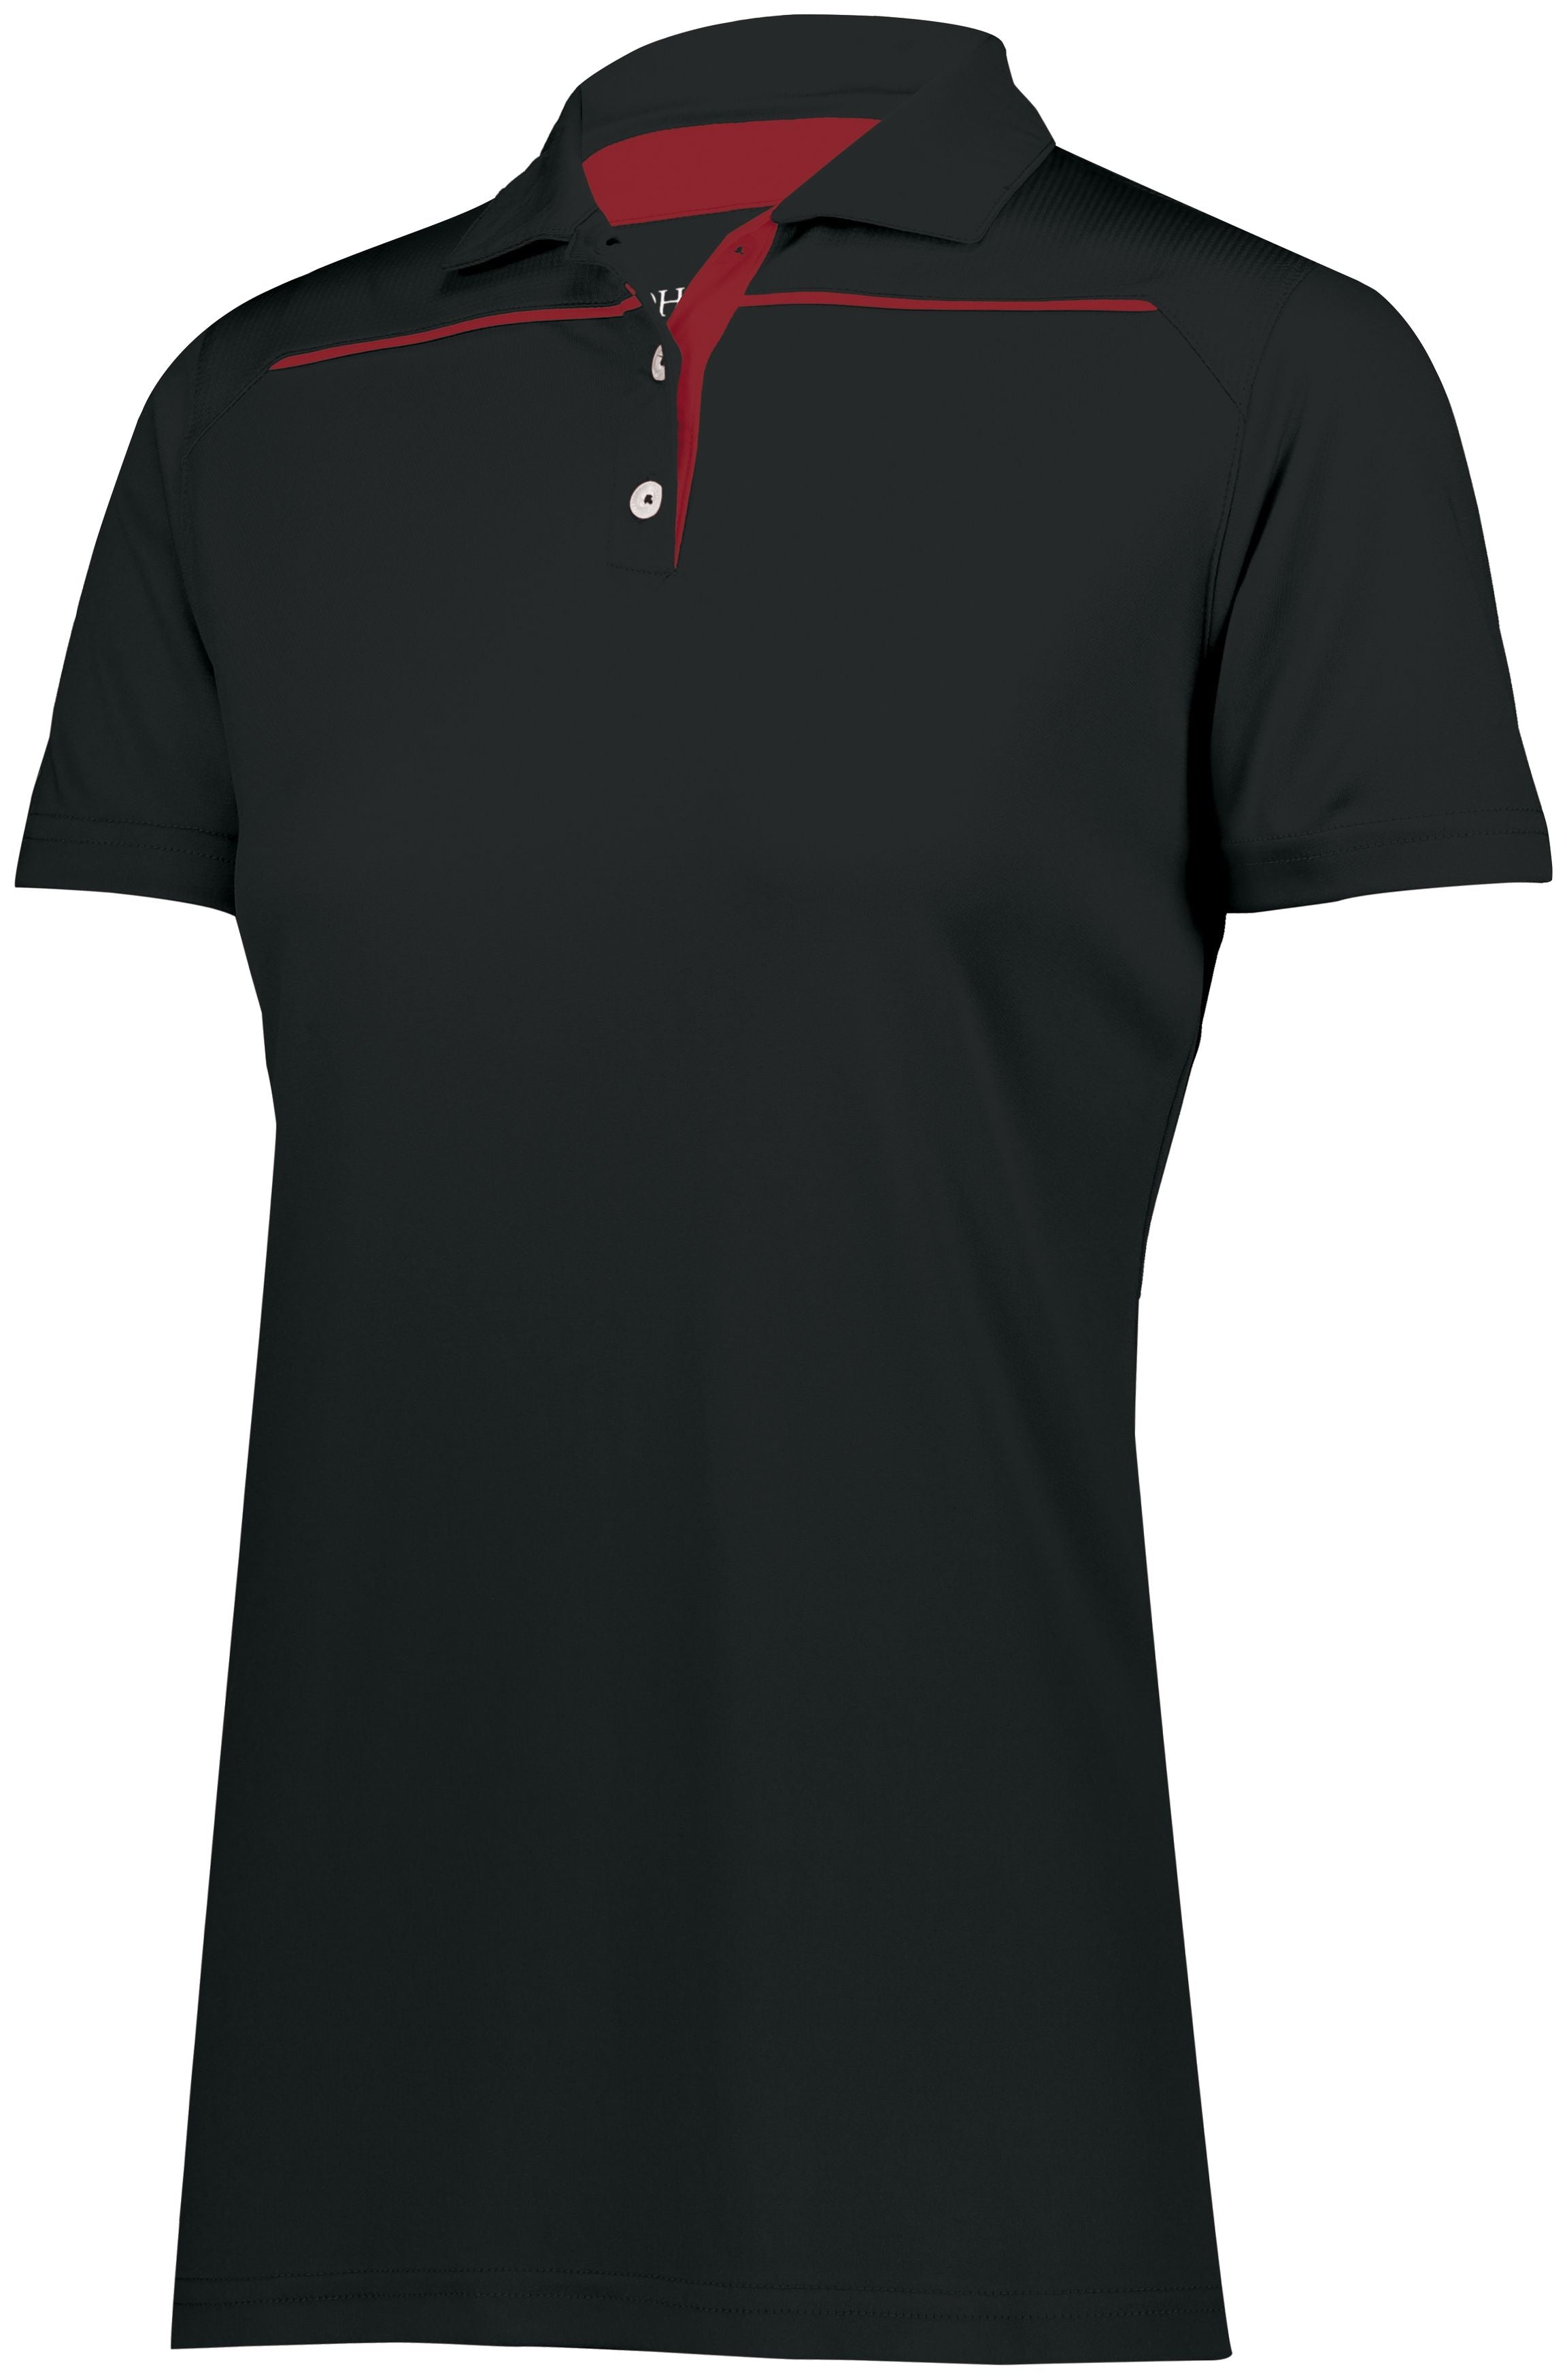 Holloway Ladies Defer Polo in Black/Scarlet  -Part of the Ladies, Ladies-Polo, Polos, Holloway, Shirts product lines at KanaleyCreations.com